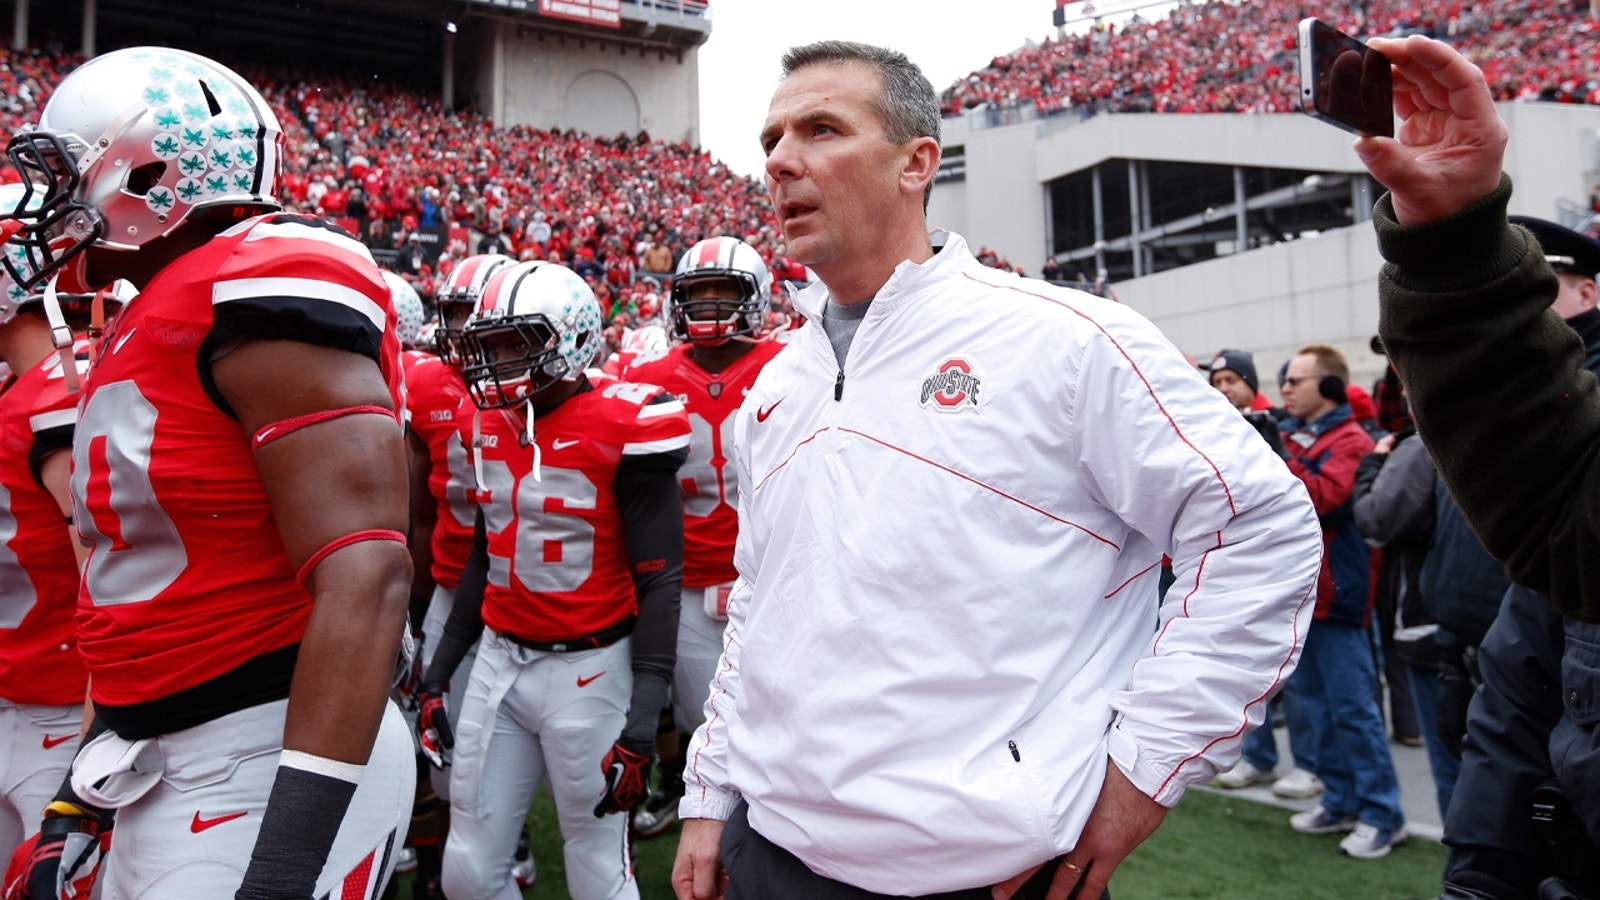 Urban Meyer reflects on his first ever win against Michigan as head coach